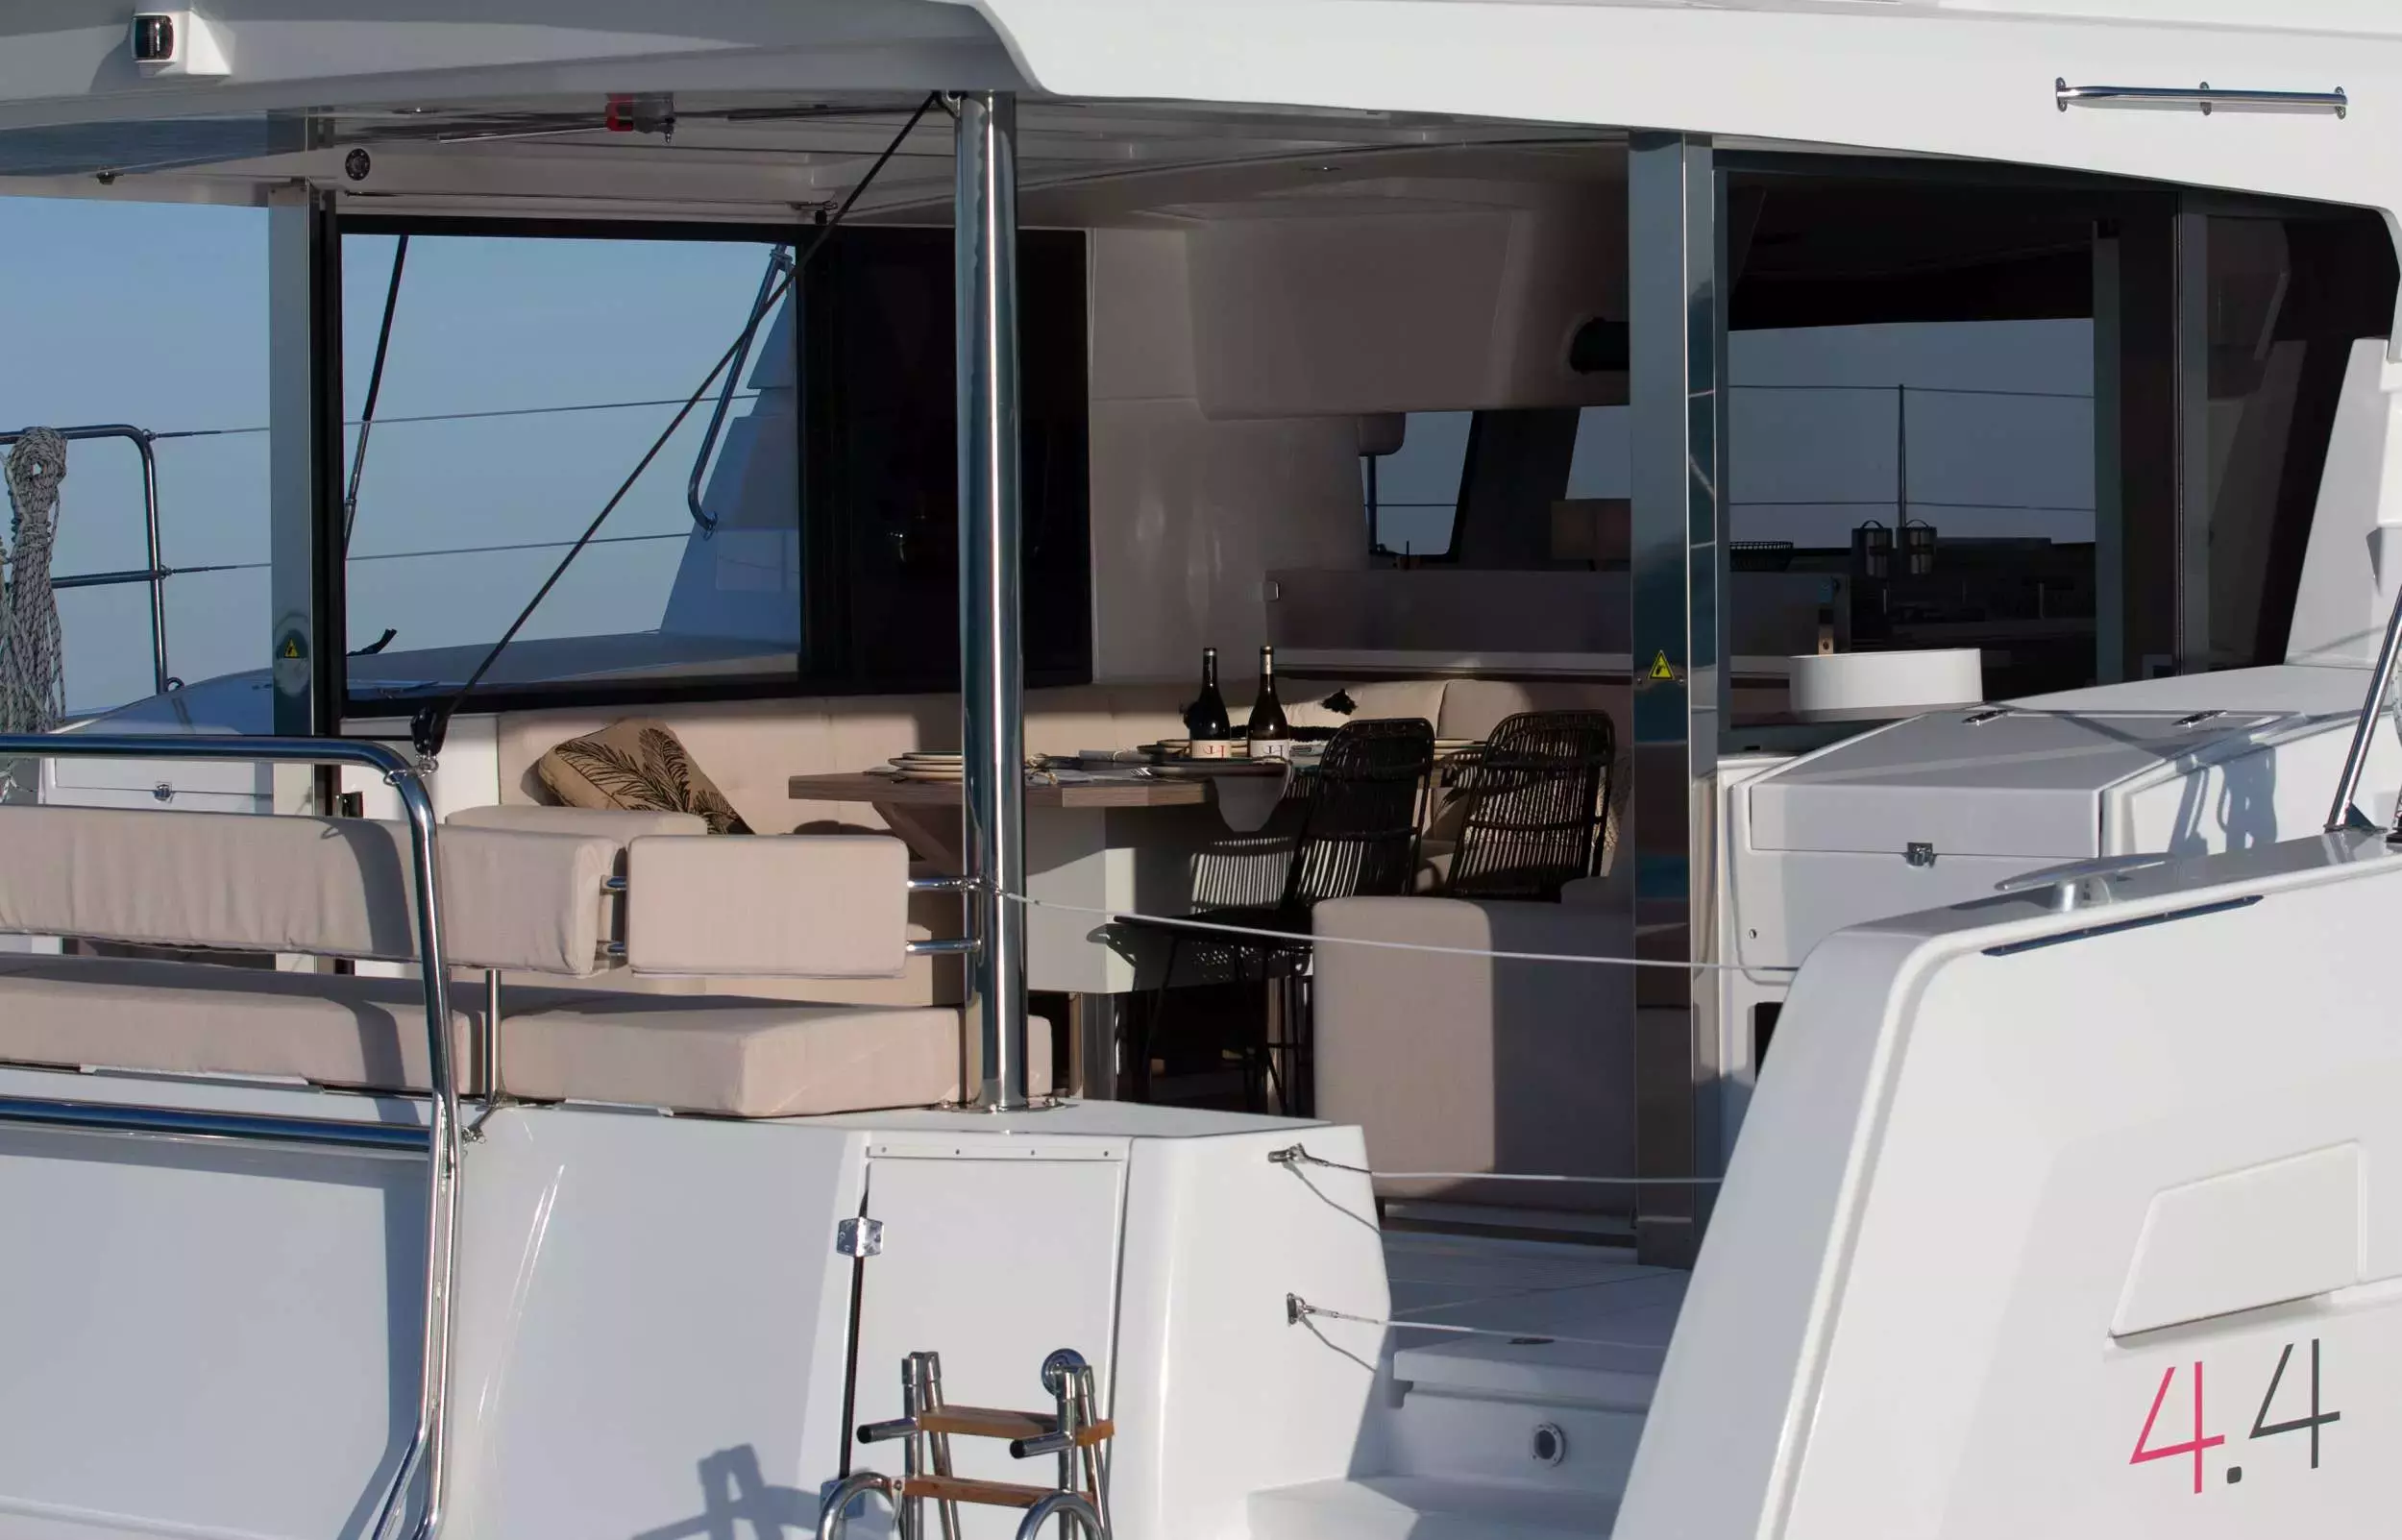 Said by Bali Catamarans - Top rates for a Charter of a private Sailing Catamaran in Spain